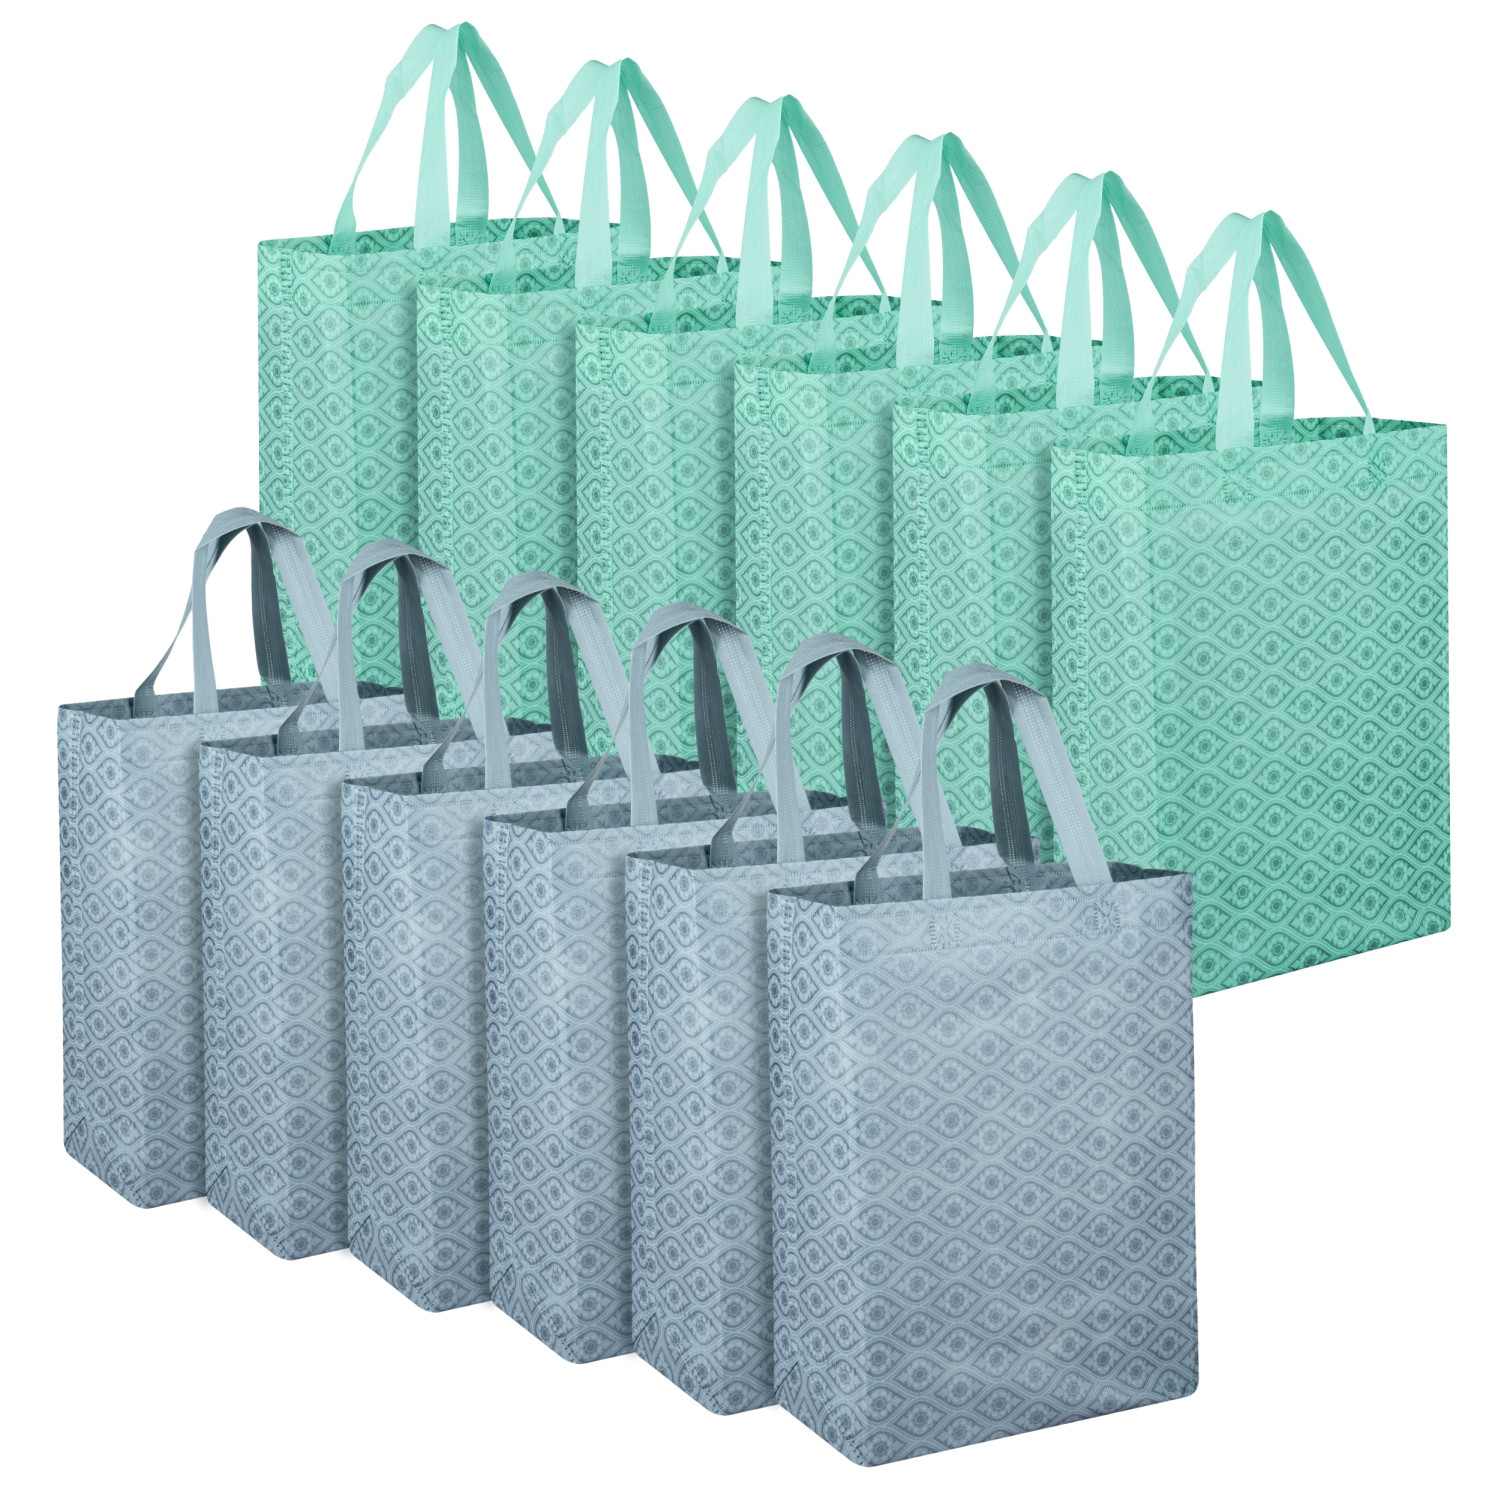 Best Insulated Grocery Bag - Order Today | 1 Bag At A Time